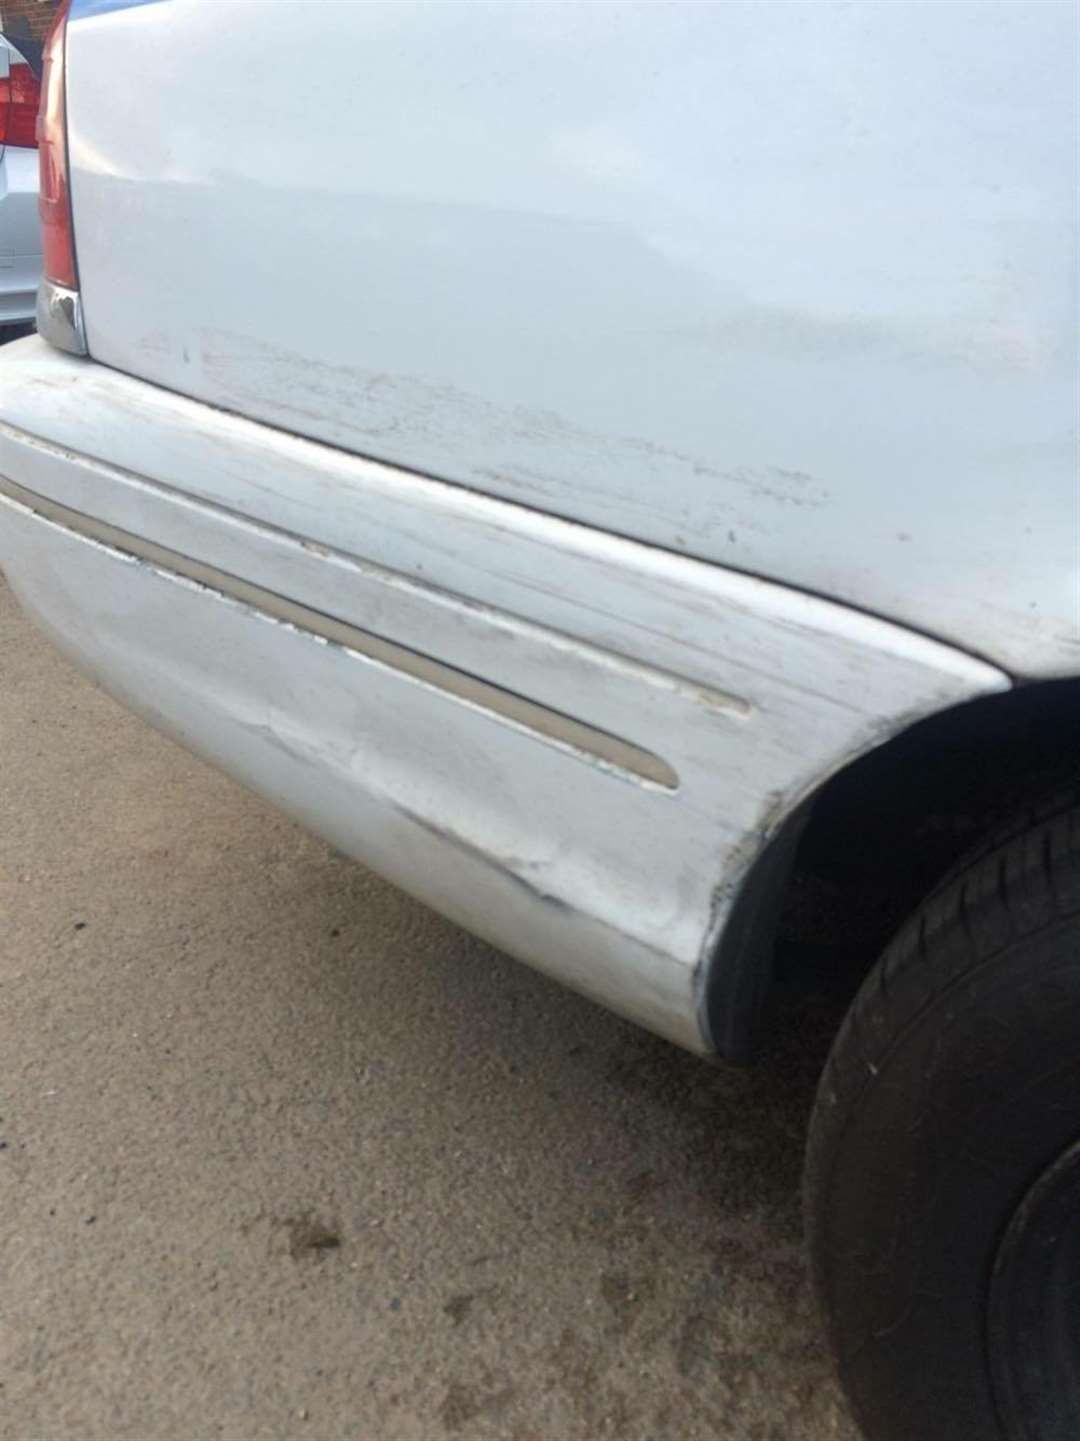 Damage to the paint work could cost £200